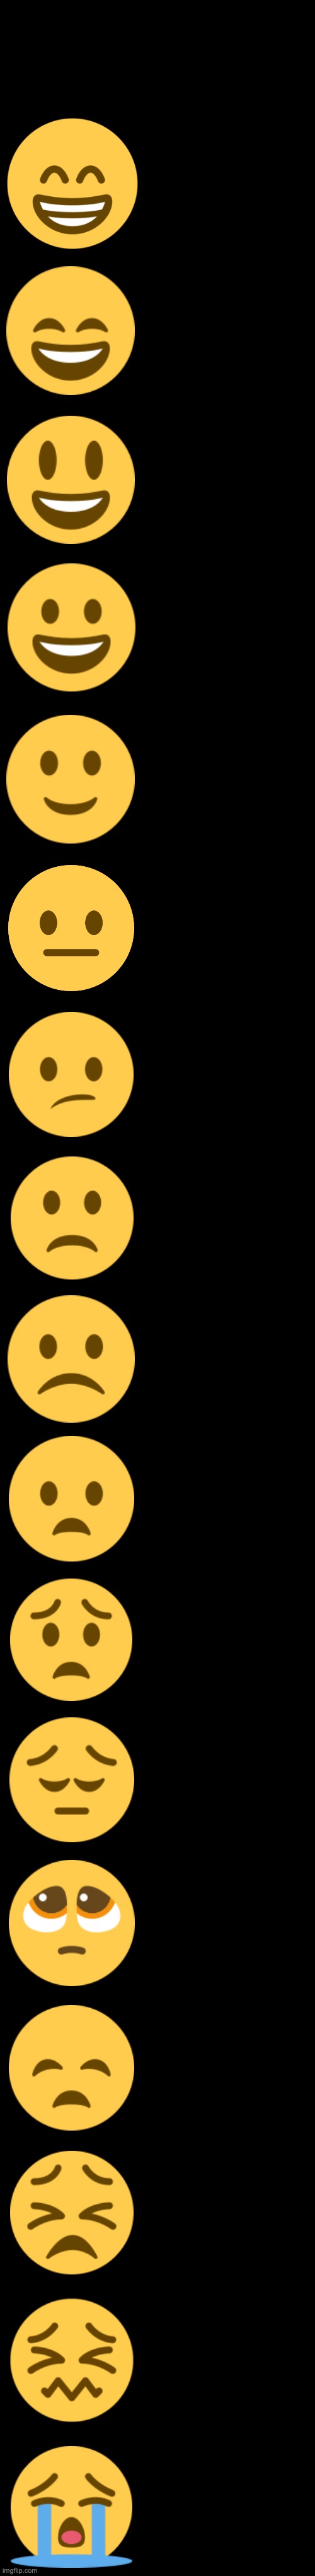 High Quality Emoji Becoming Sad Extended Blank Meme Template